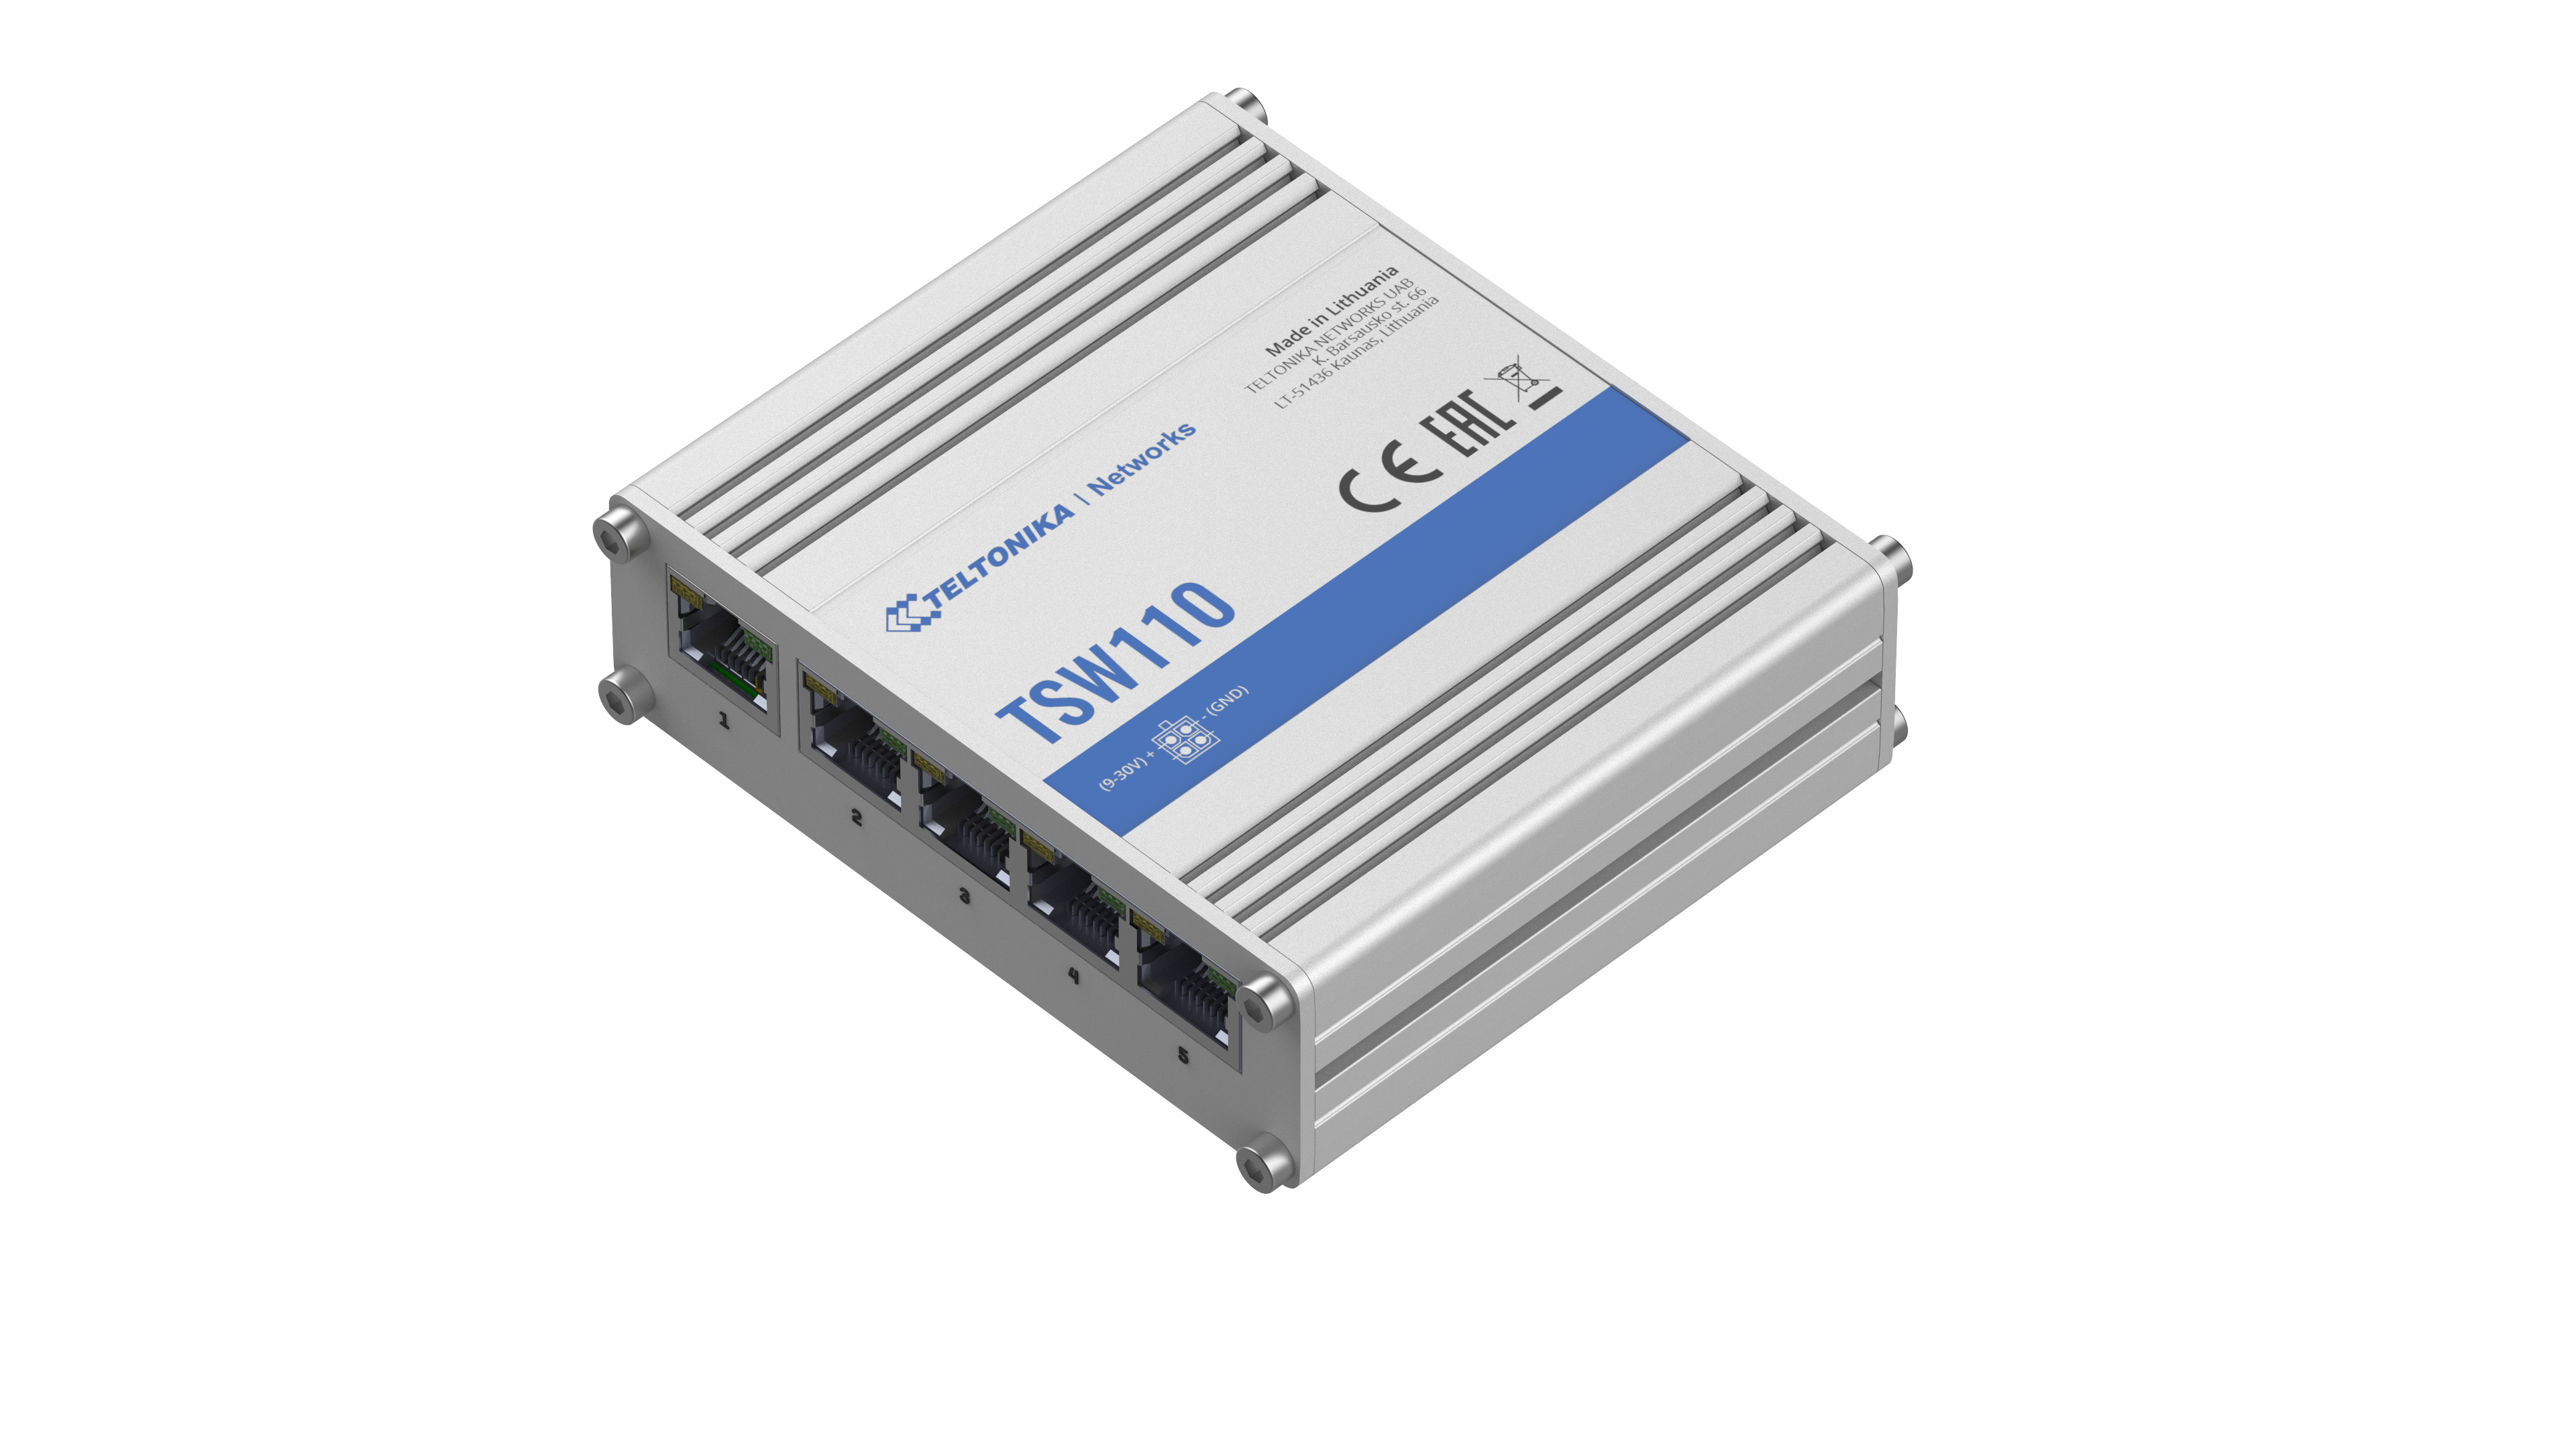 TSW110 – Unmanaged switch, 5xGbE, 4xPOE 802.3at/af (copia)